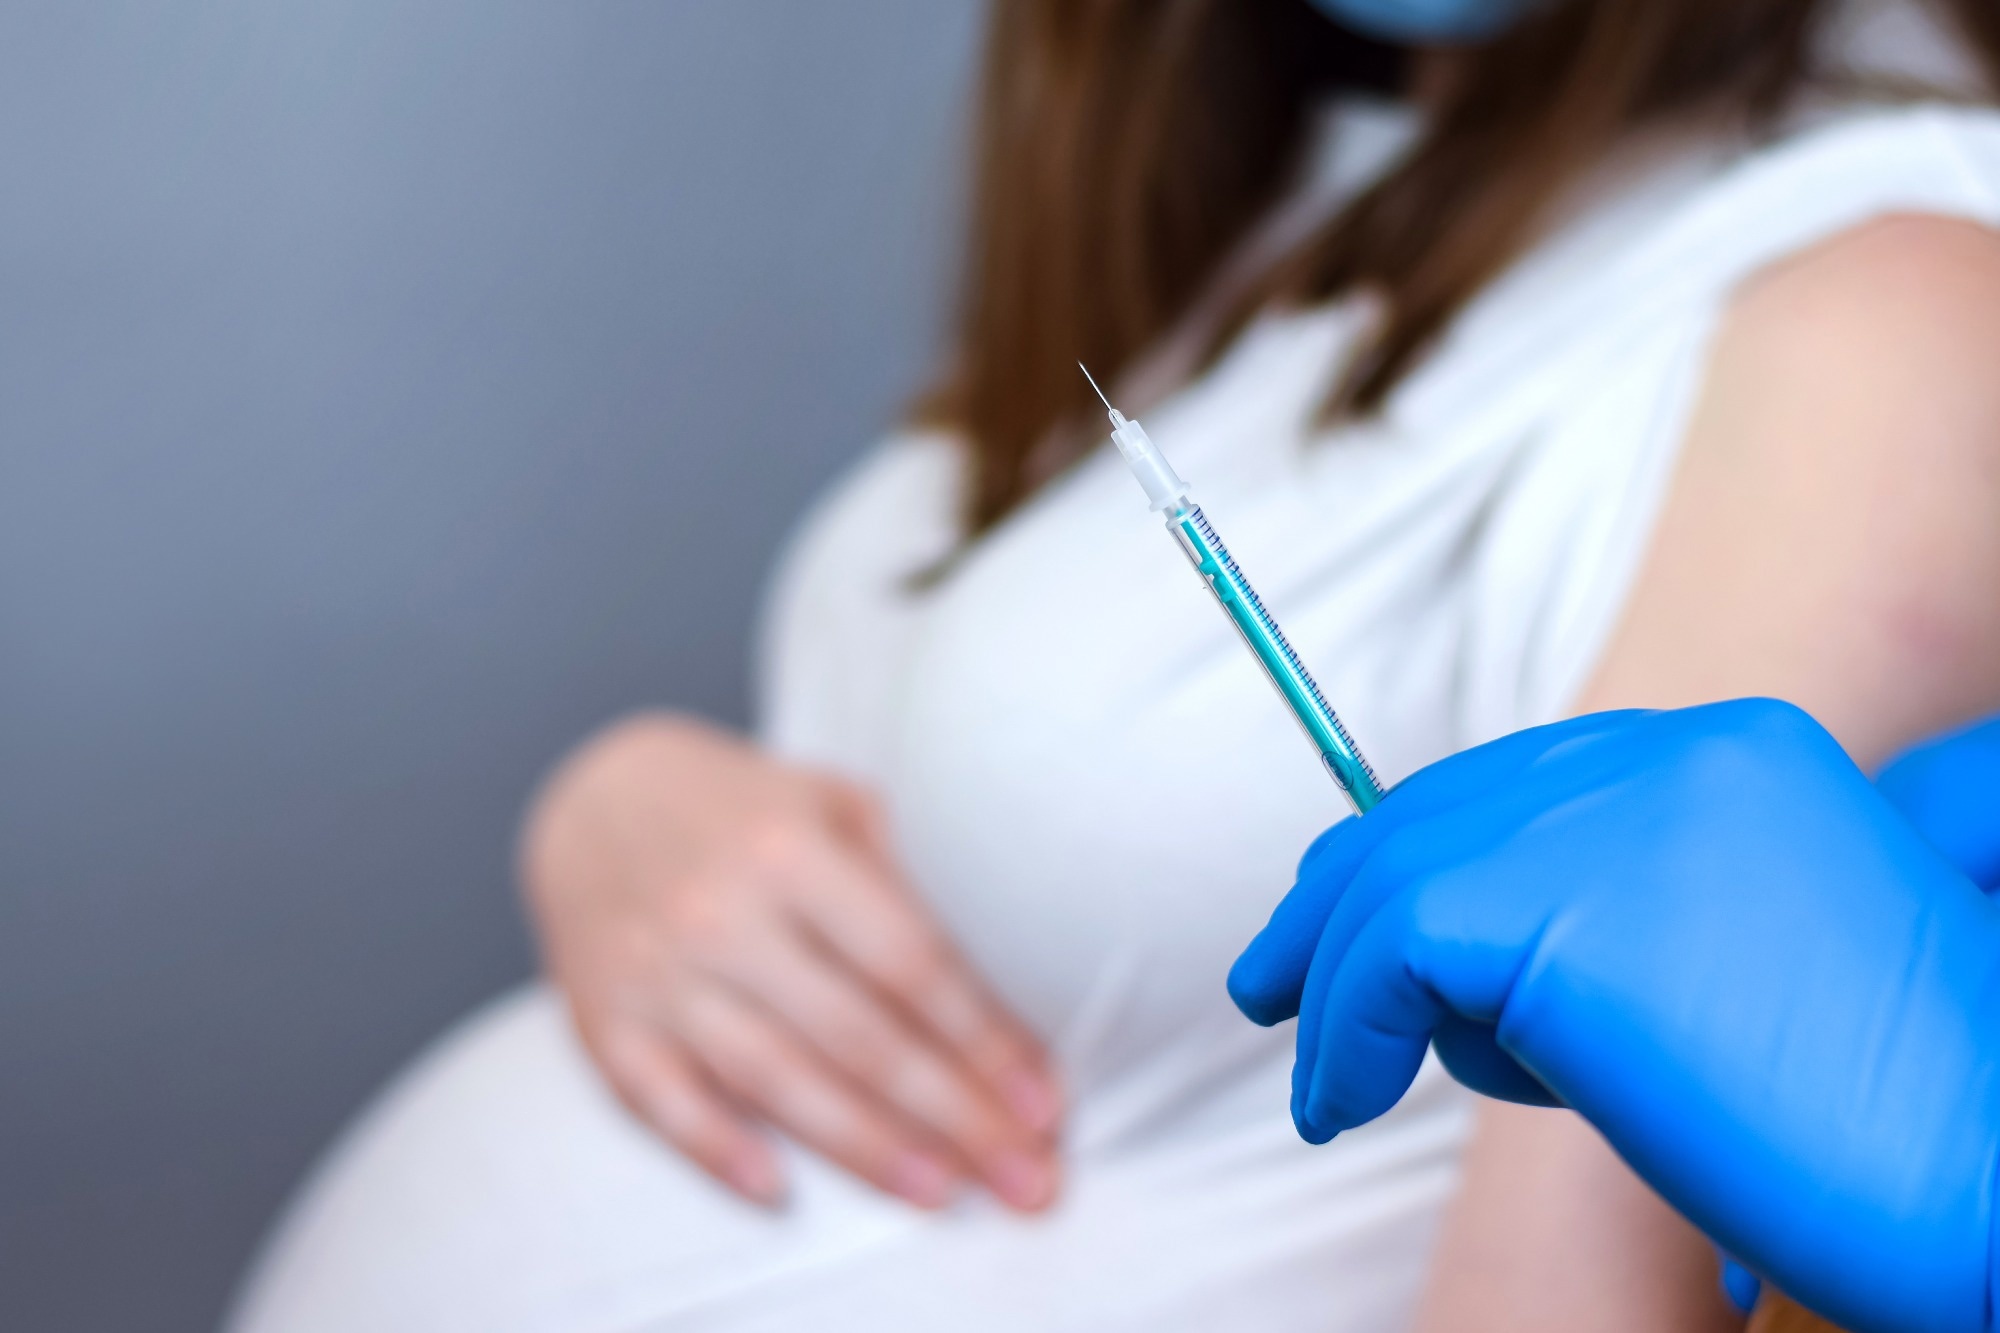 Study: COVID-19 Booster Vaccination in Early Pregnancy and Surveillance for Spontaneous Abortion. Image Credit: MarinaDemidiuk/Shutterstock.com